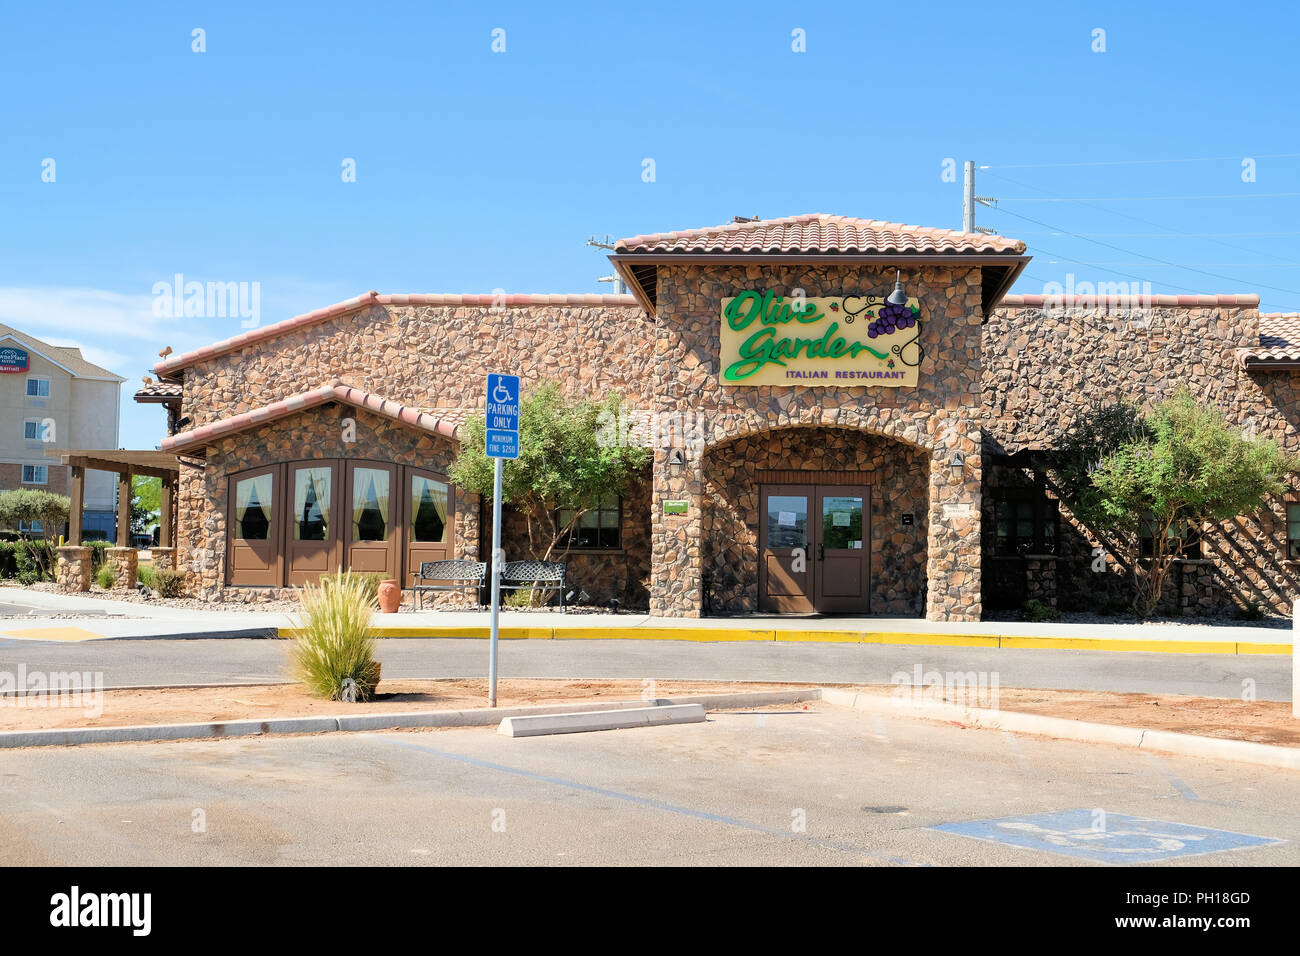 Olive Garden Italian Restaurant High Resolution Stock Photography and